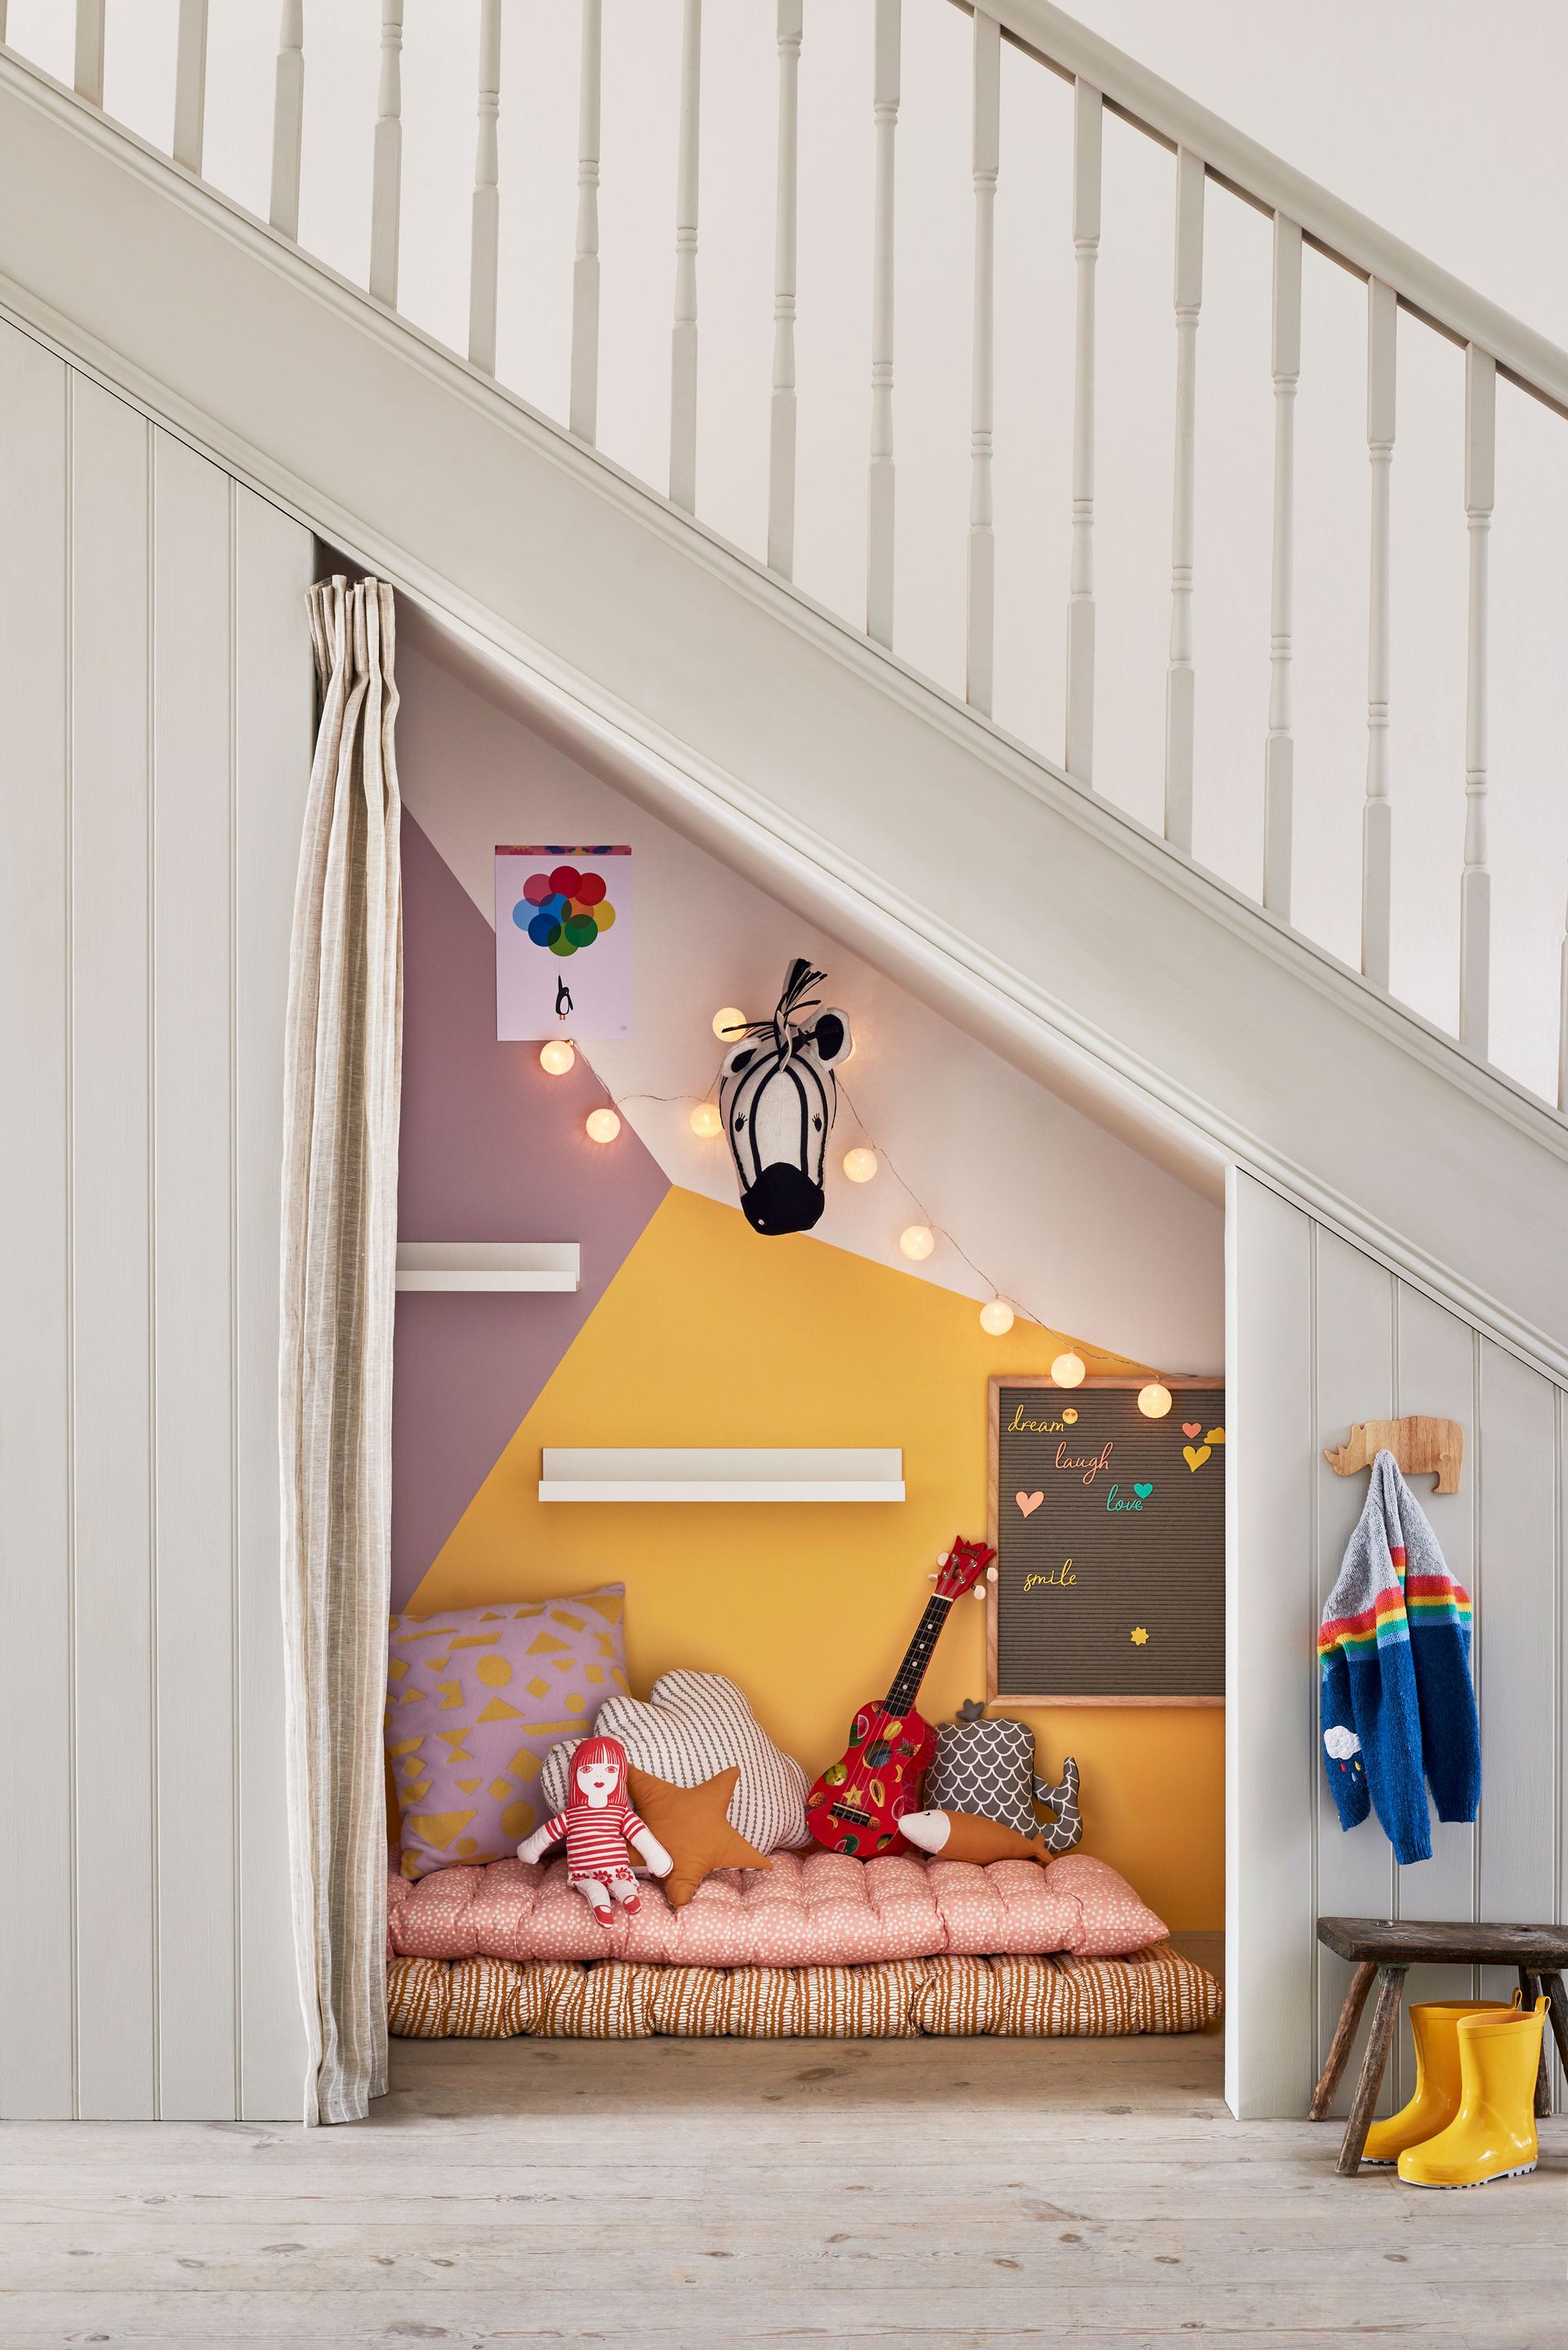 <p>                     If you have been browsing small bedrooms and despair of finding playroom space, think laterally. Kids love secret nooks and crannies, so if you’re short on space and can’t spare a room to turn into a playroom then consider converting the area under the stairs.                   </p>                                      <p>                     Paint is your friend here – create a cozy area with two or three favorite colors – and fill it with a squishy mattress, comfy shaped pillows and plenty of fairy lights, strung well out of reach of really young children. If you don’t have an electric point then use battery-operated lights instead, but do ensure safety of really little ones is uppermost in your mind when designing with string lights.                   </p>